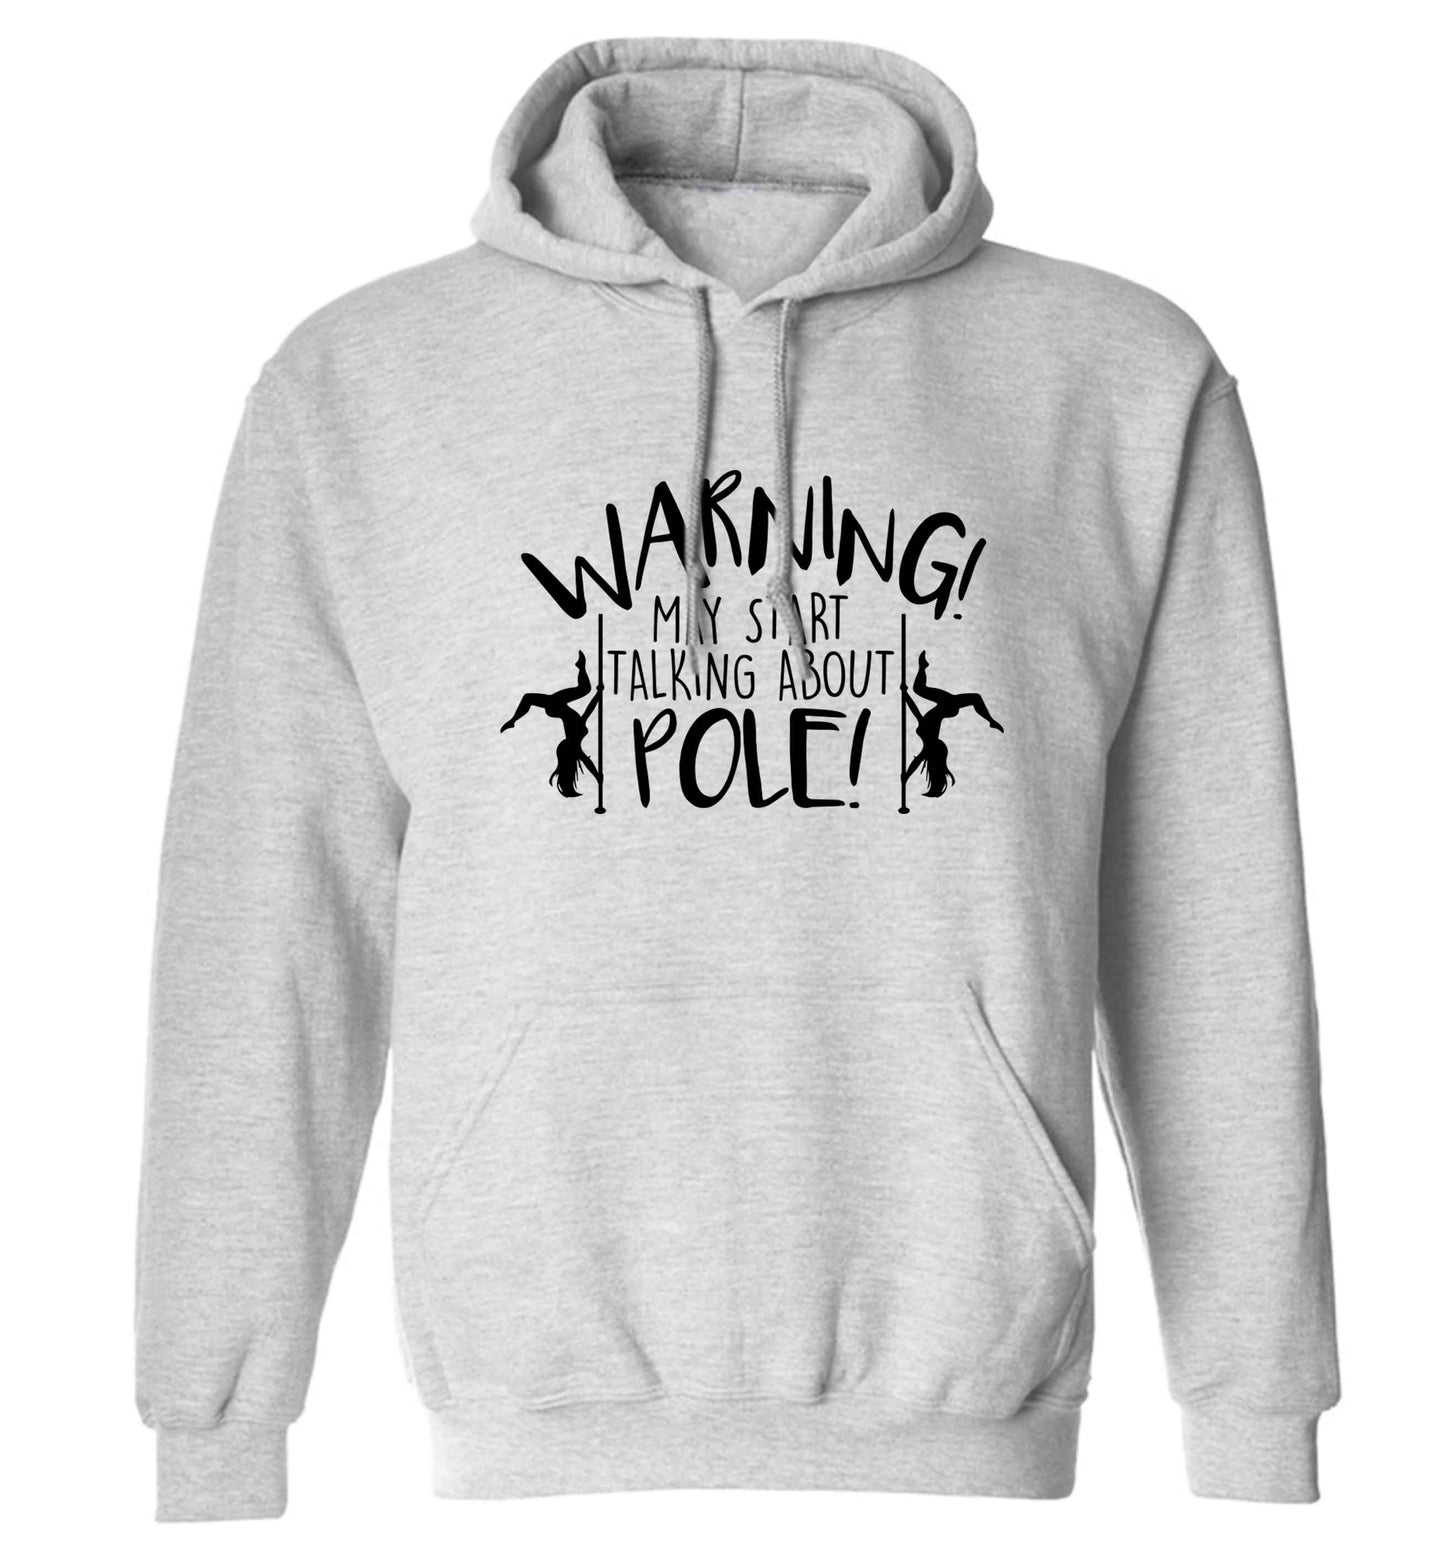 Warning may start talking about pole  adults unisex grey hoodie 2XL